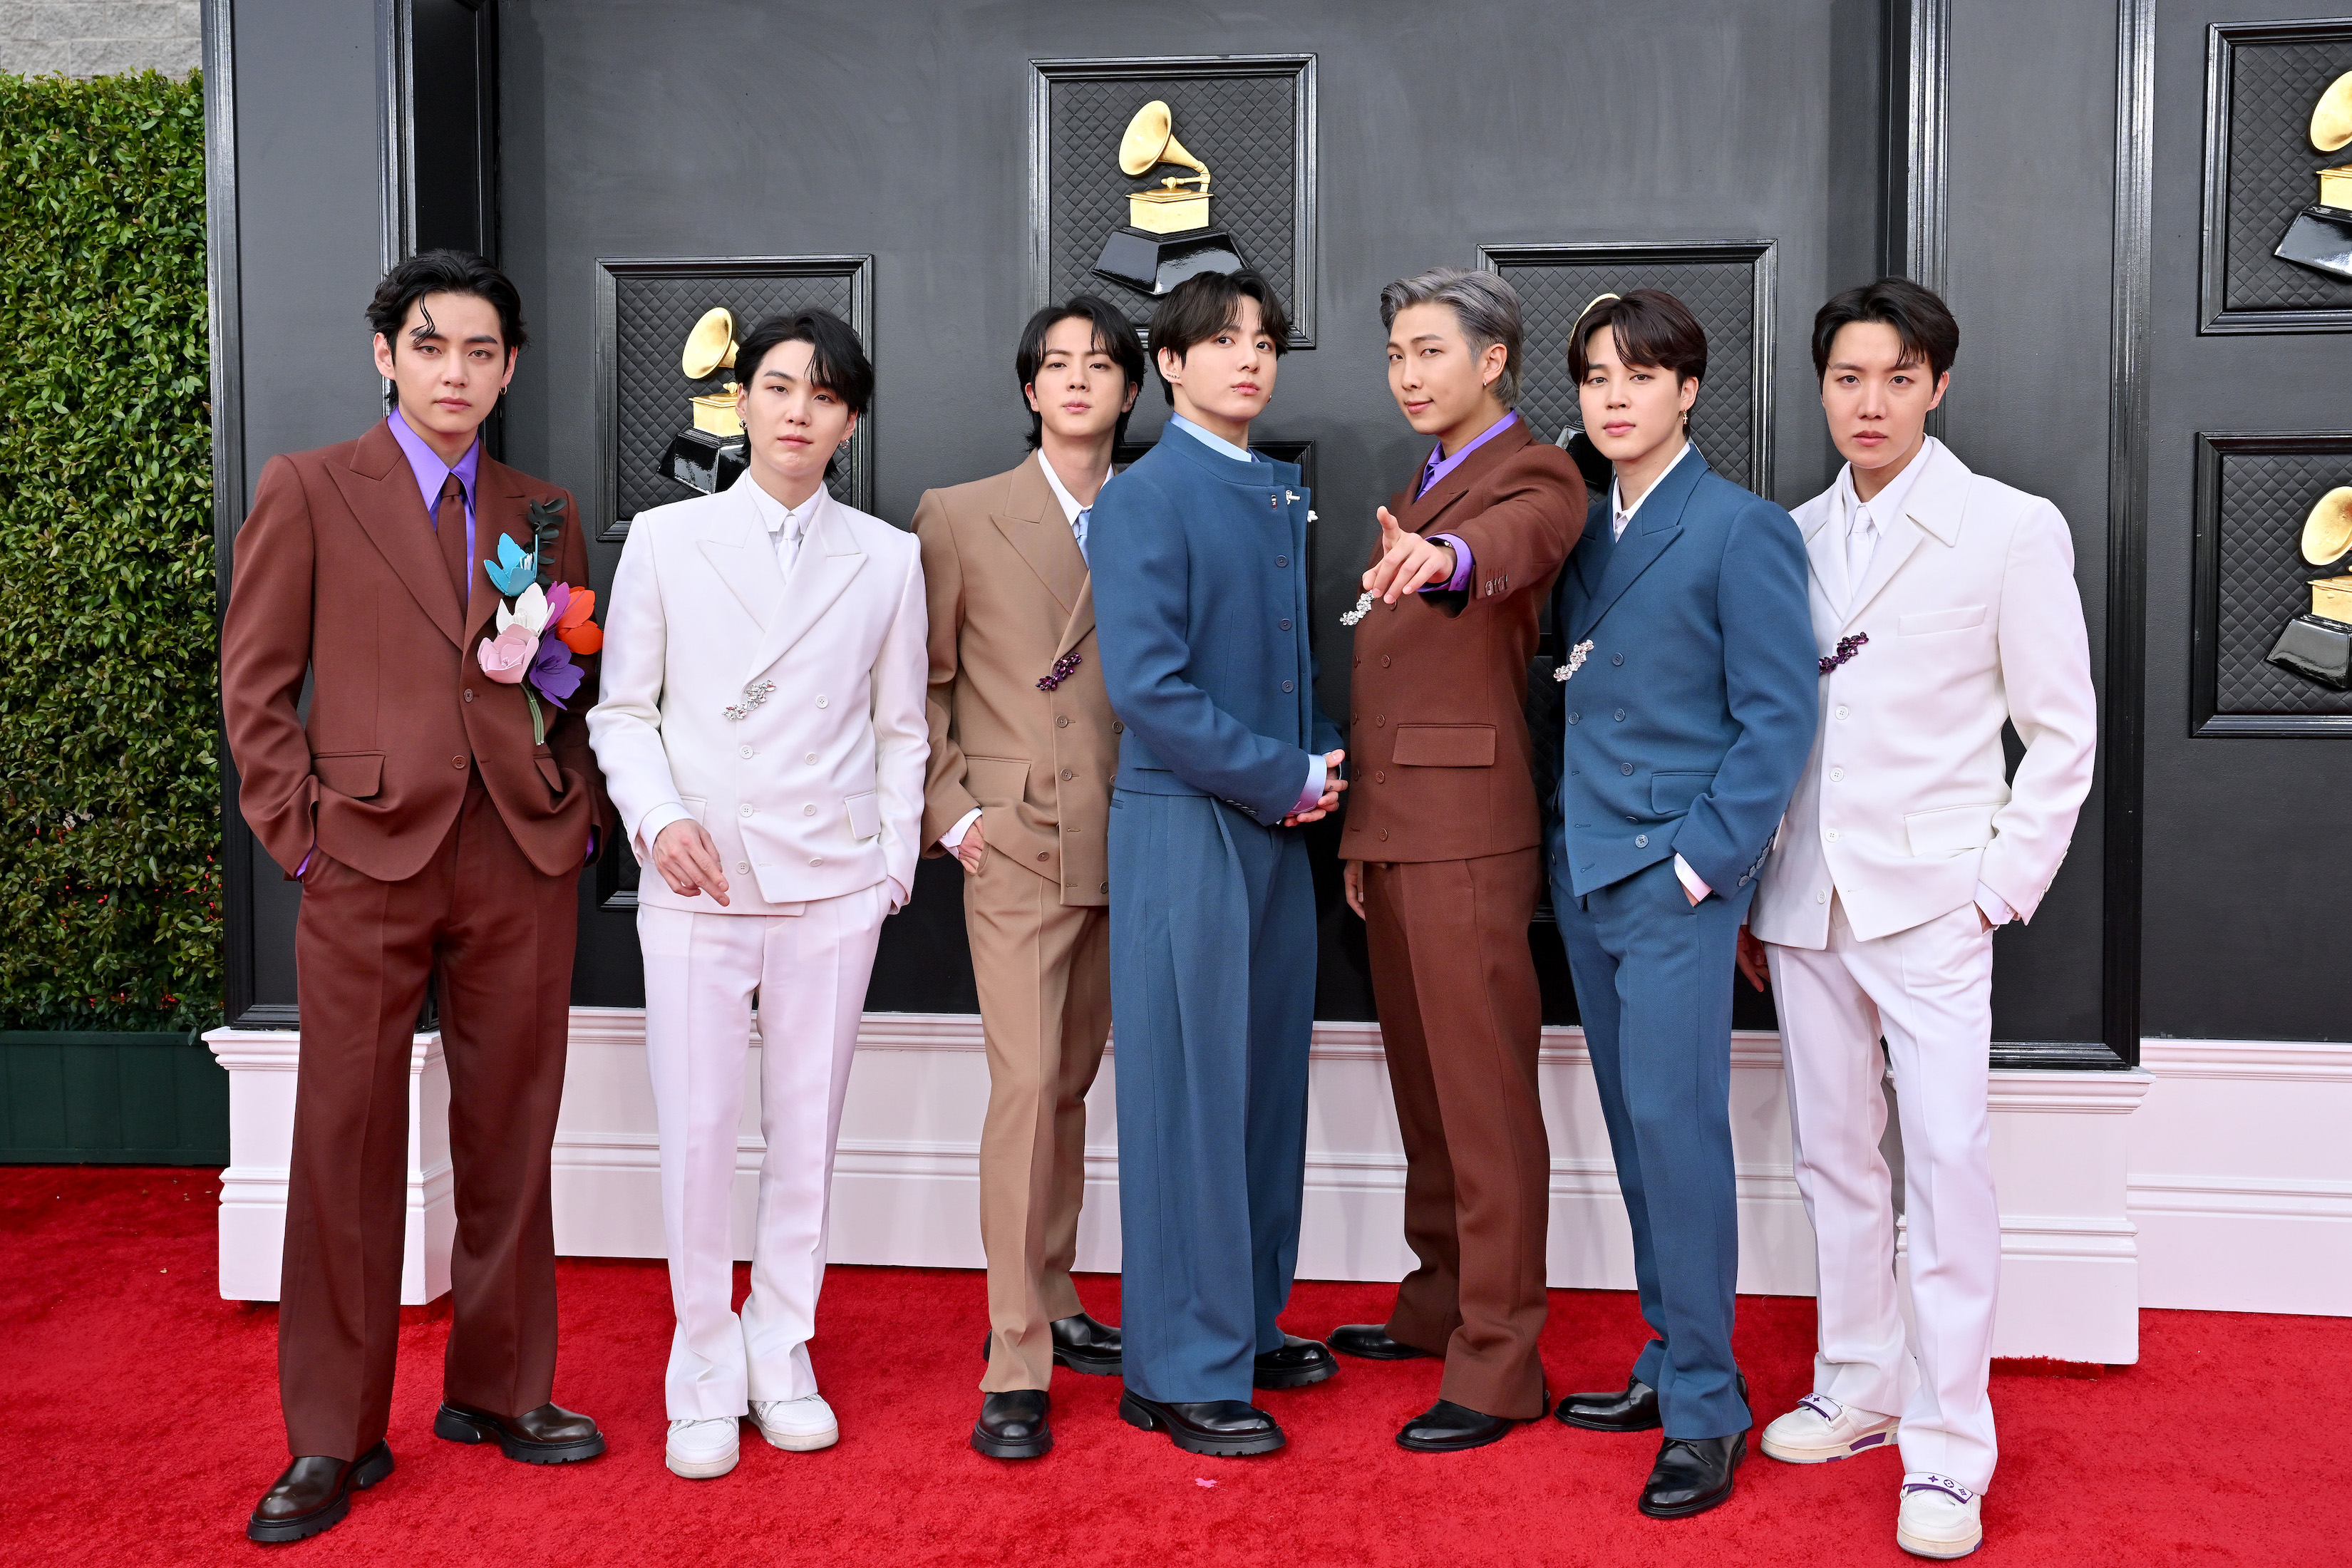 V, Suga, Jin, Jungkook, RM, Jimin, and J-Hope of BTS attends the 64th Annual GRAMMY Awards